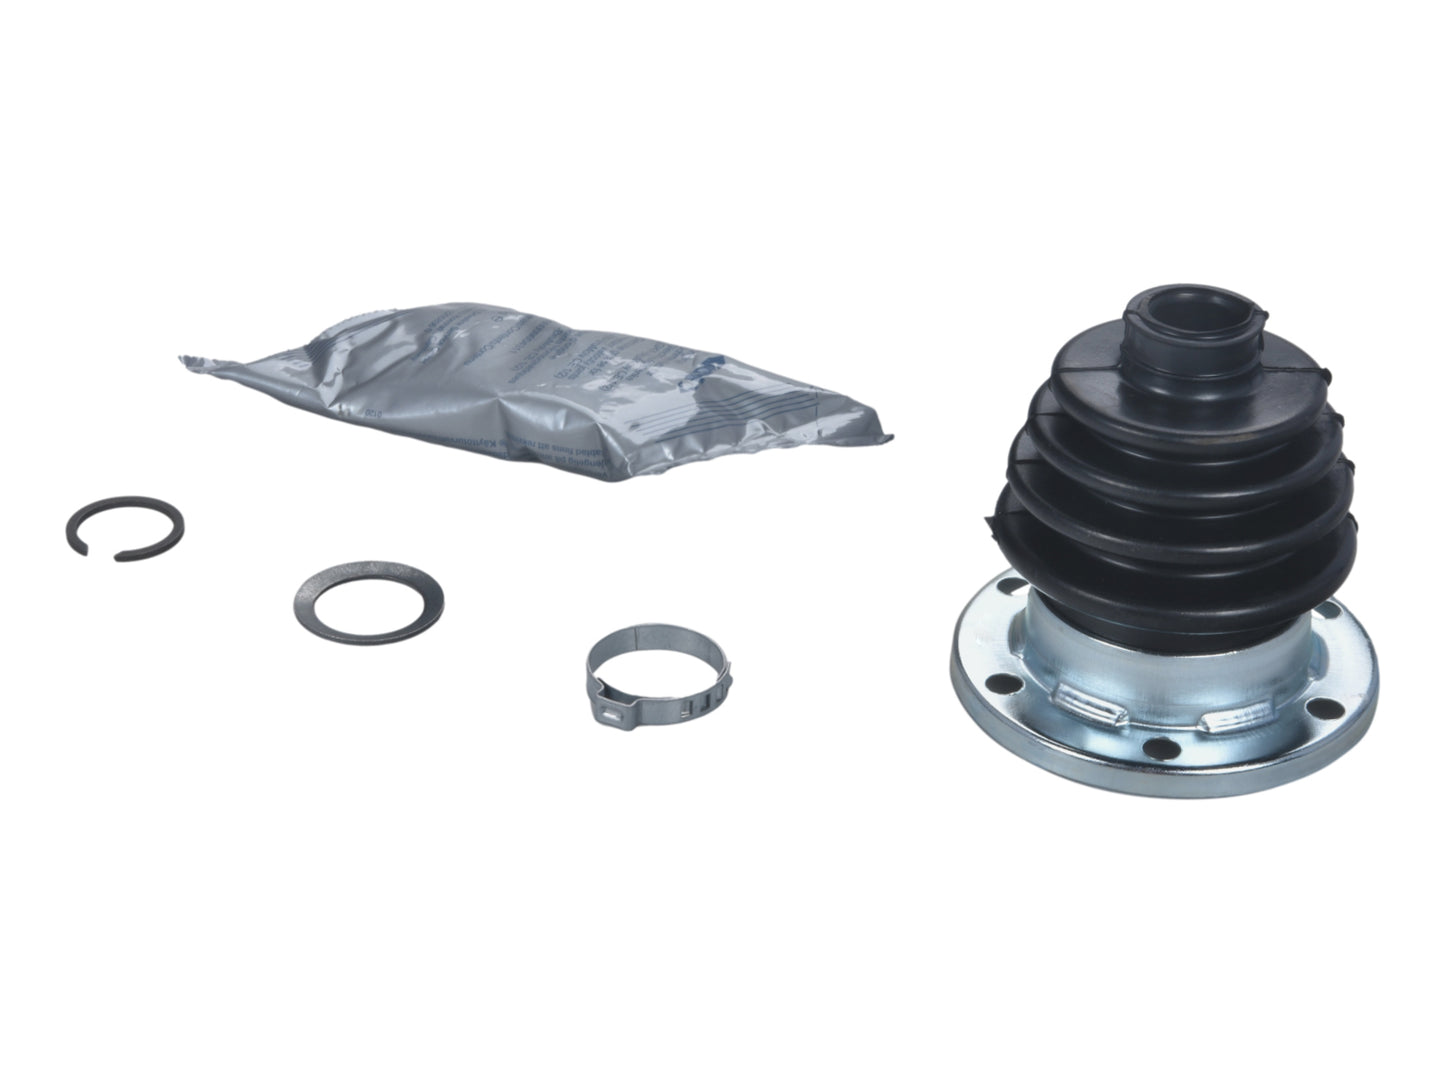 1x Axle boot for Porsche 924 944 with accessories drive shaft.